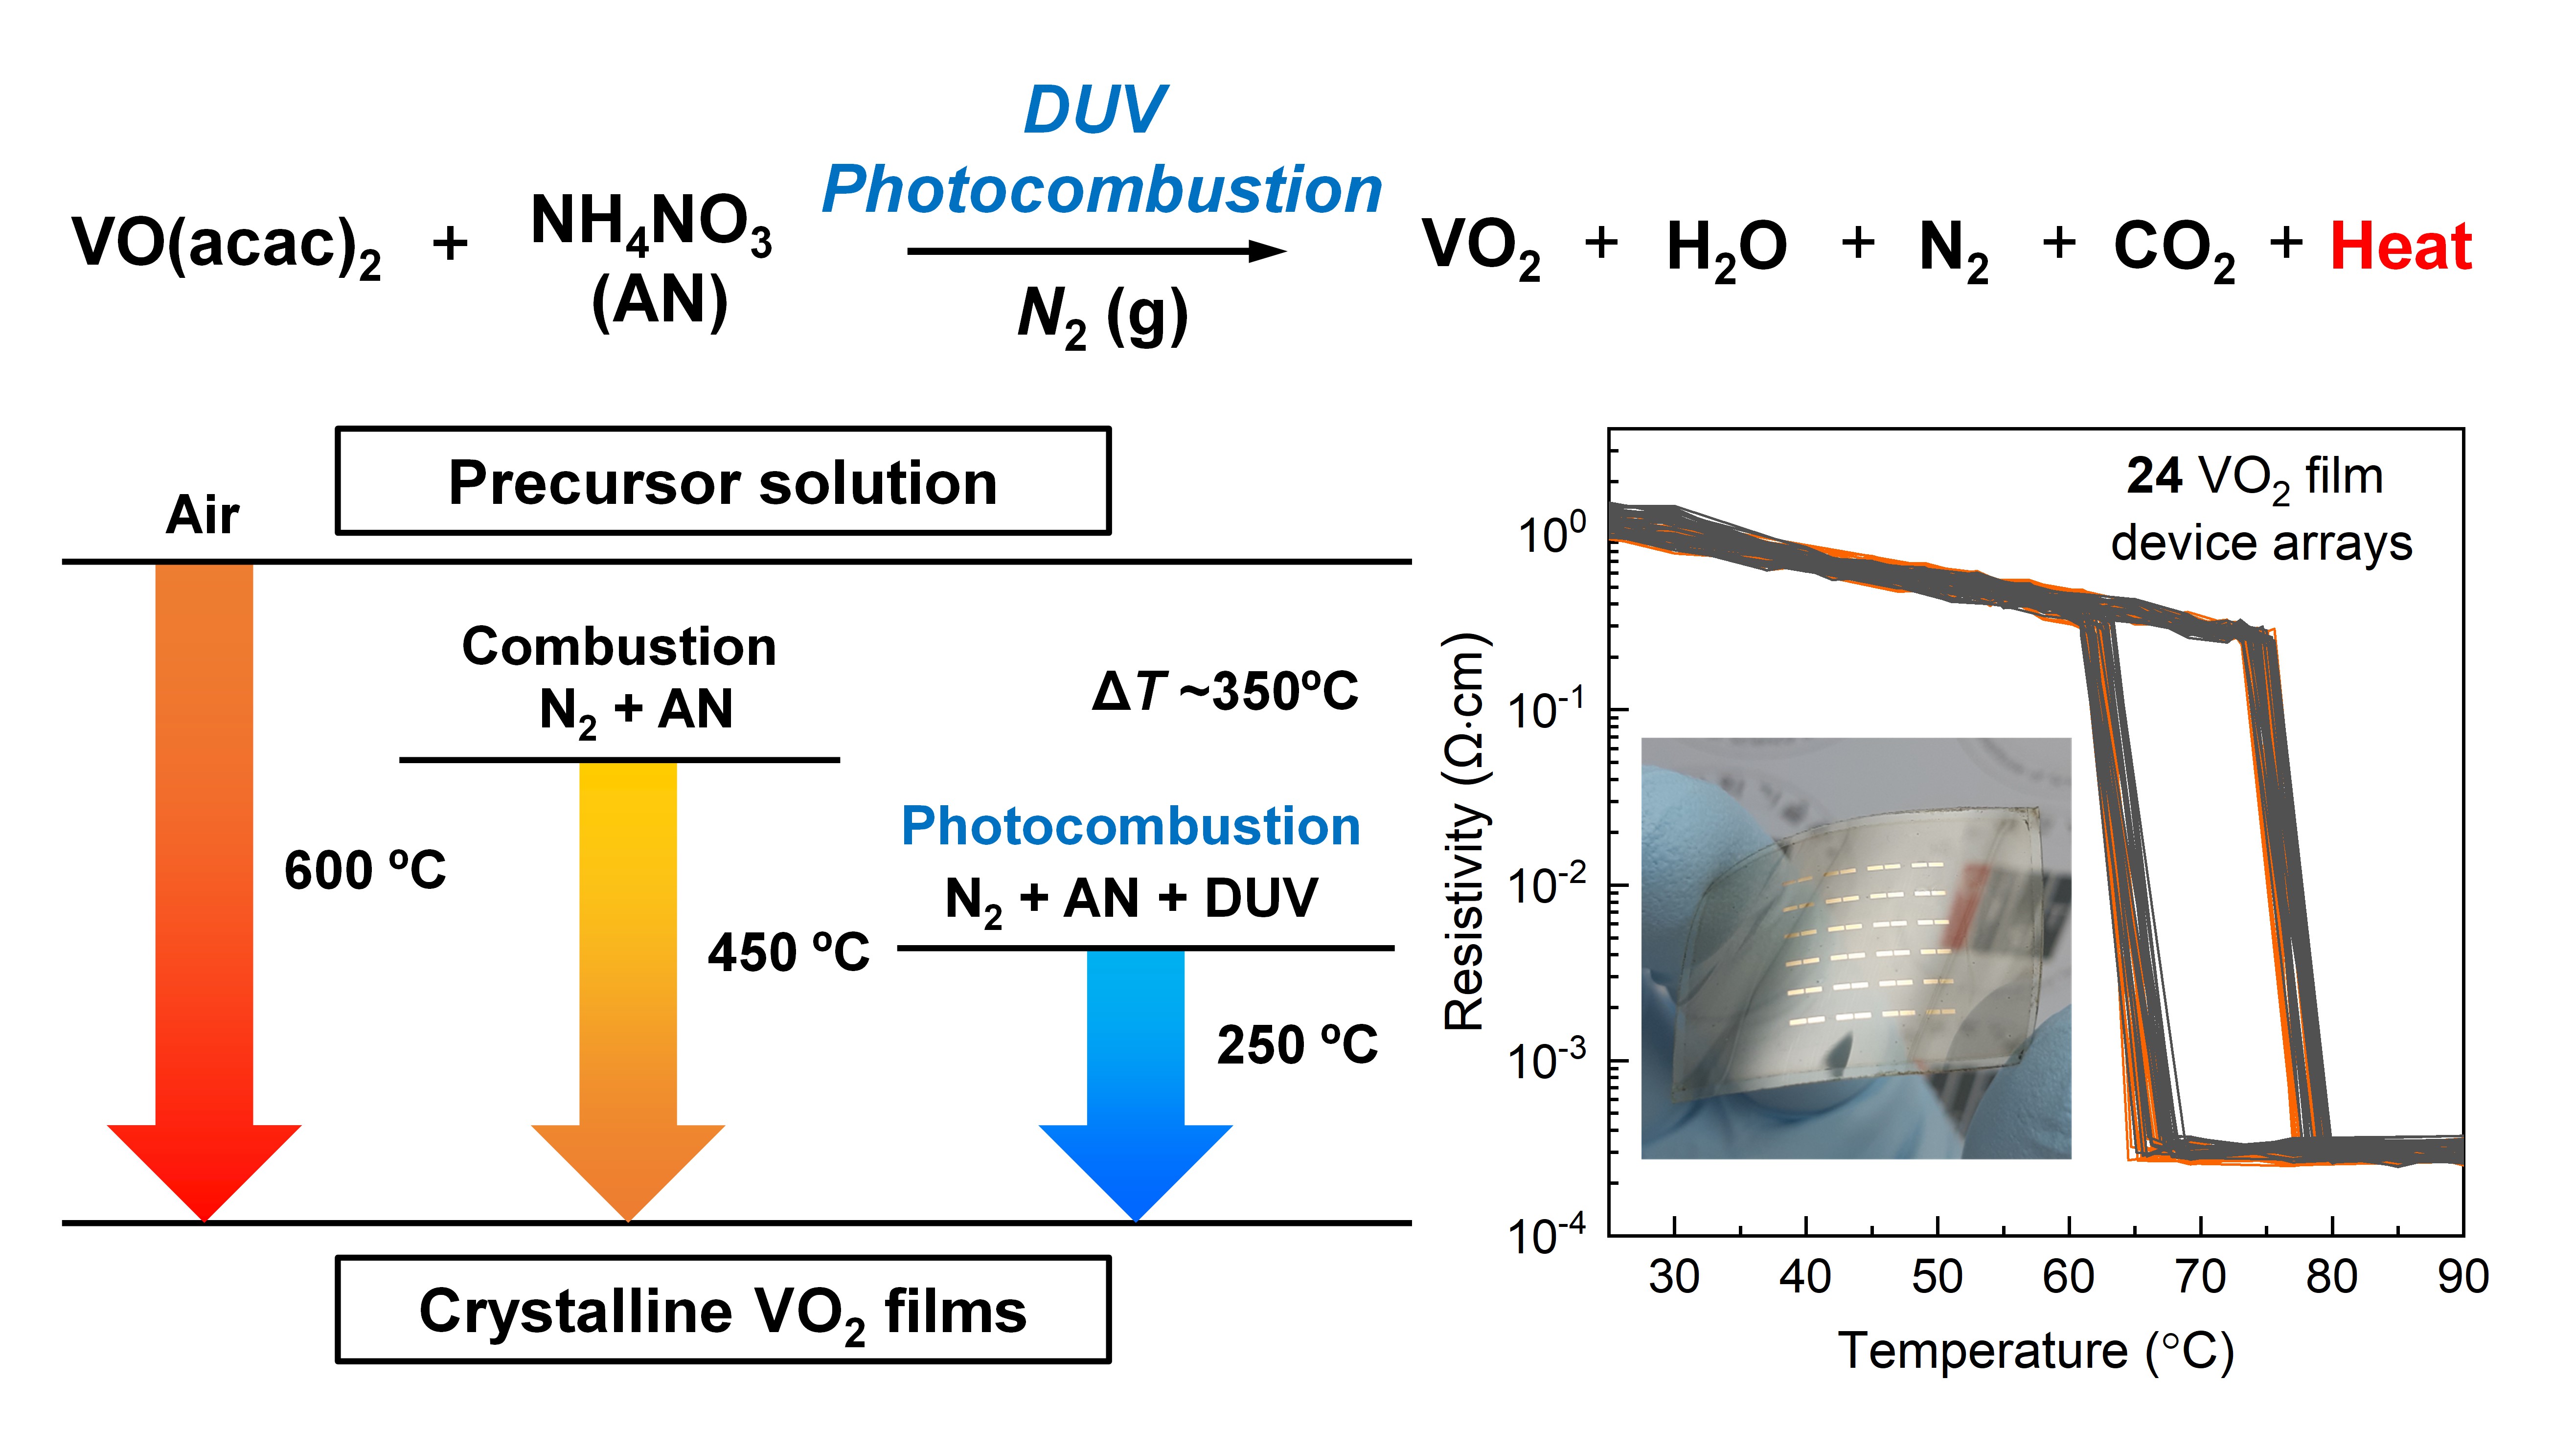 Professor Bong-Joong Kim and Professor Myung-Han Yoon's joint research team develops photocombustion process for flexible switching devices 이미지